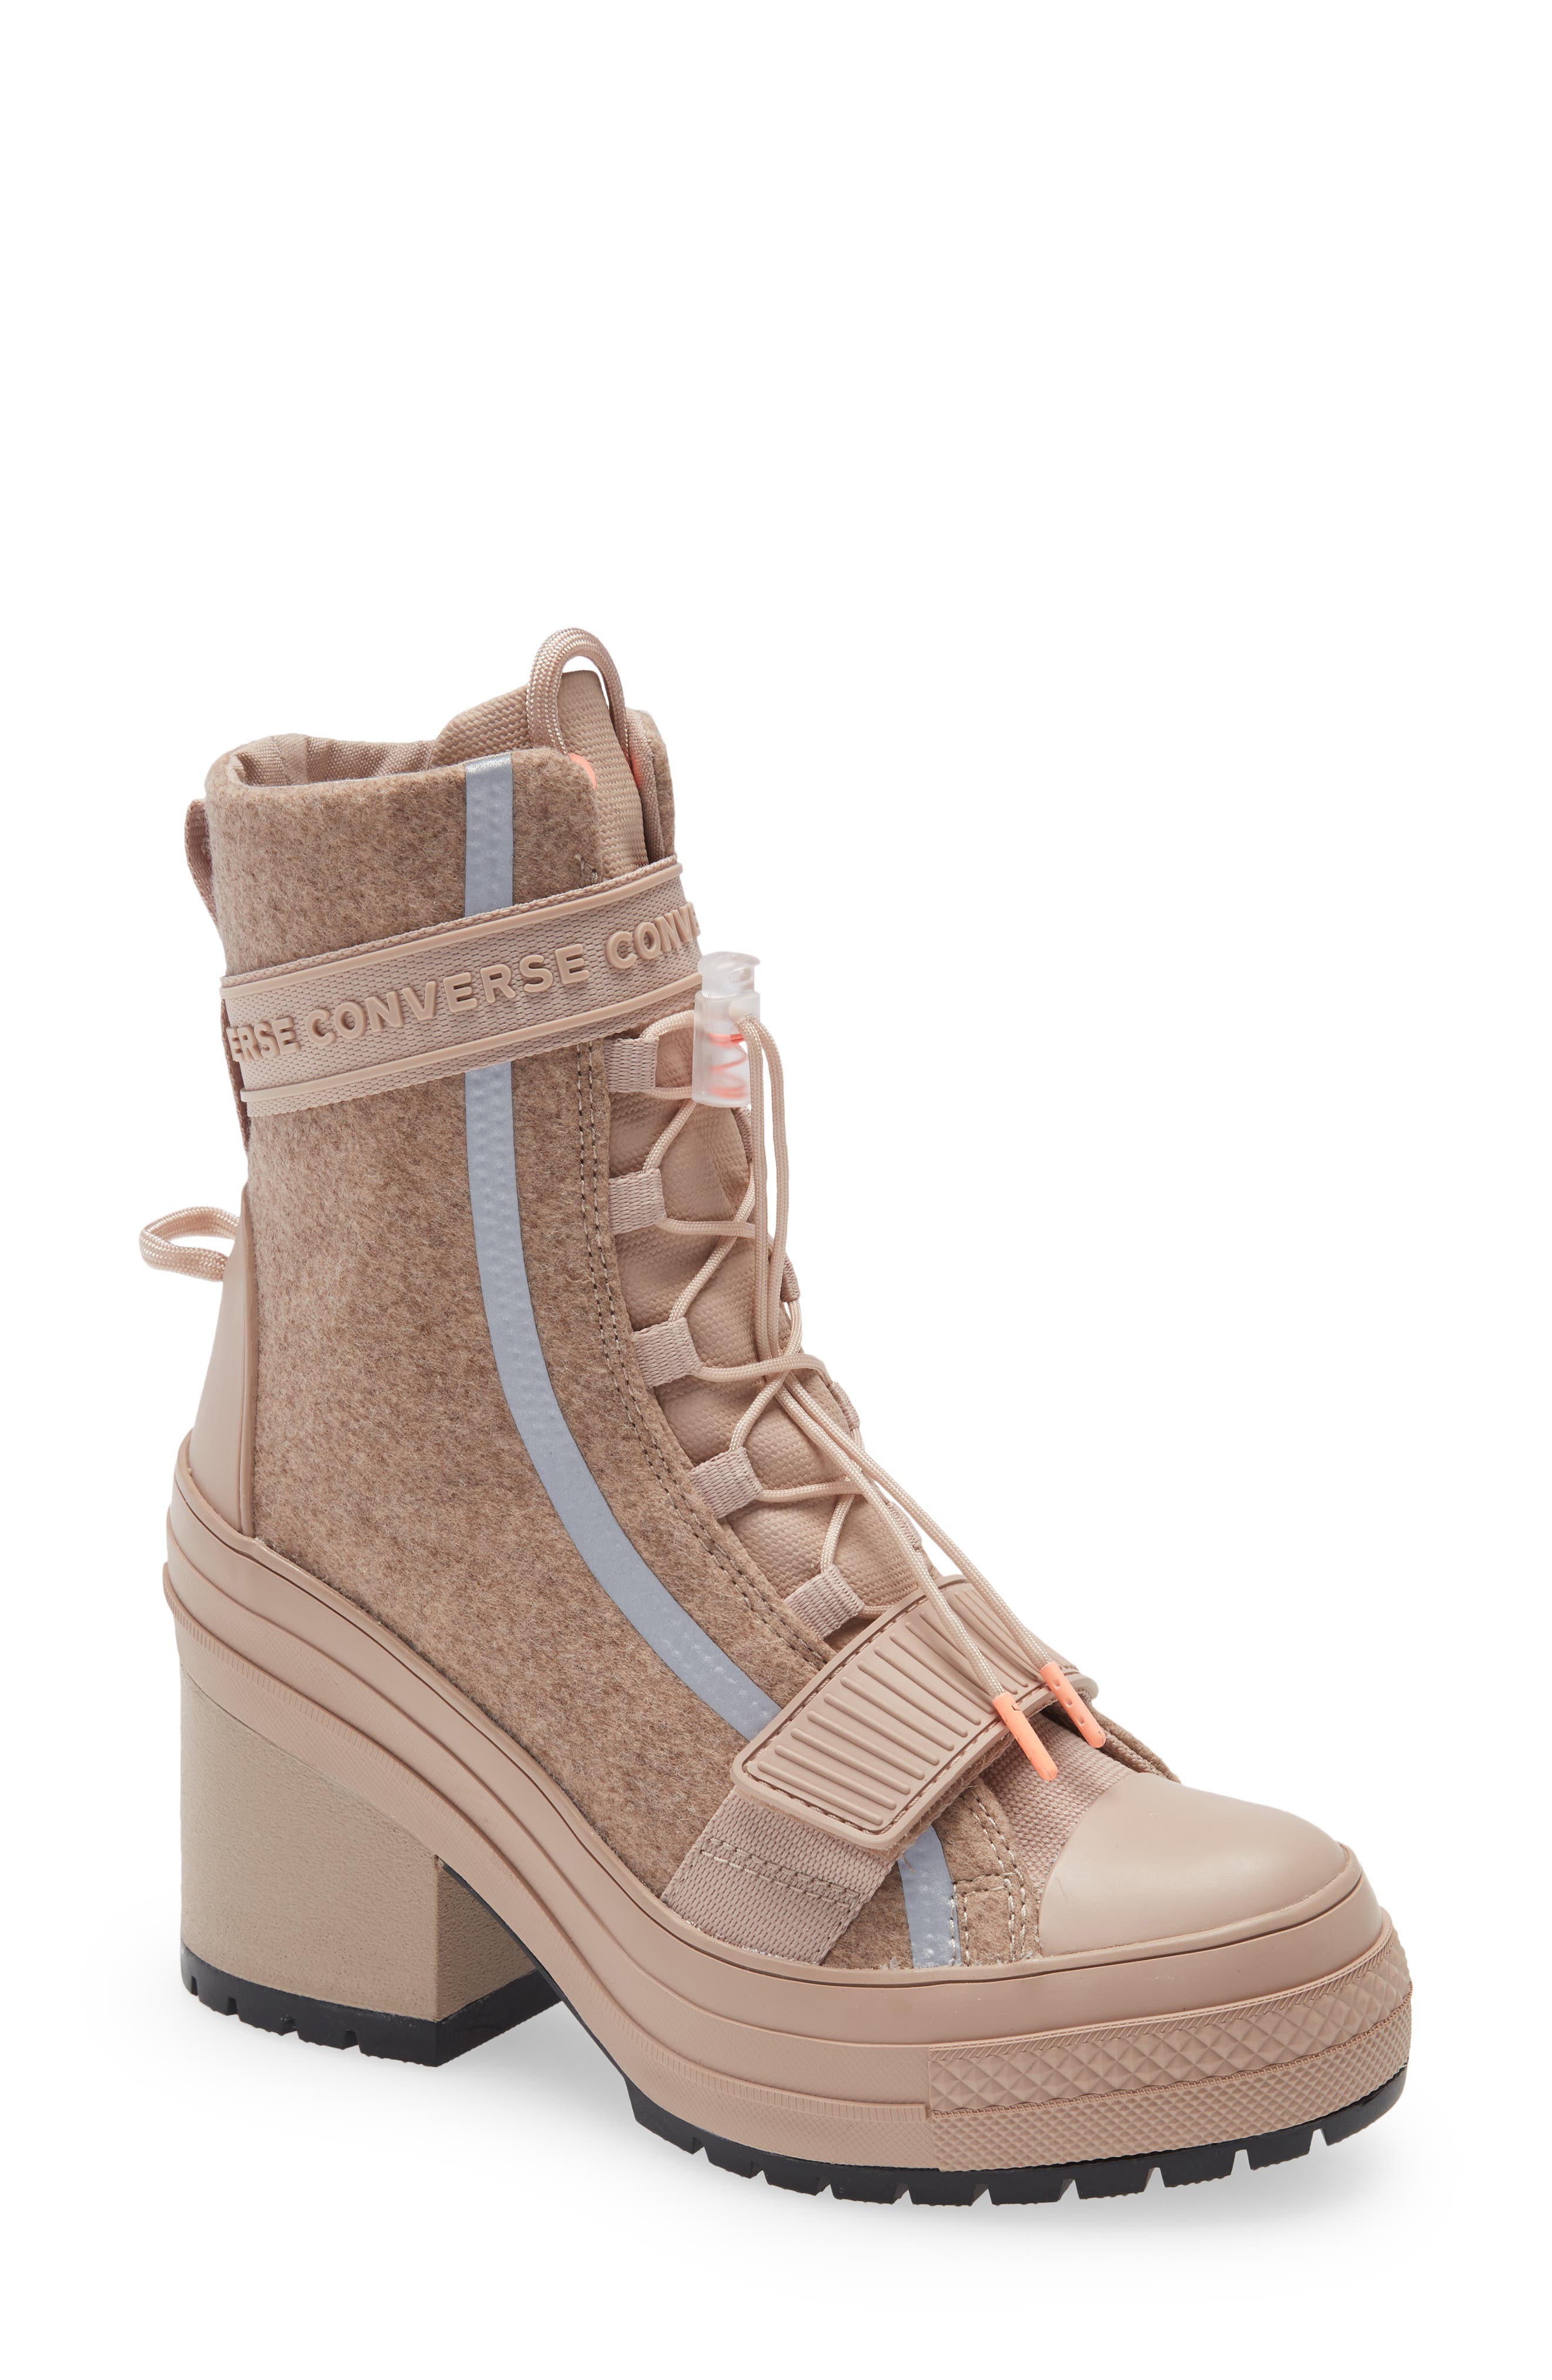 converse boots womens